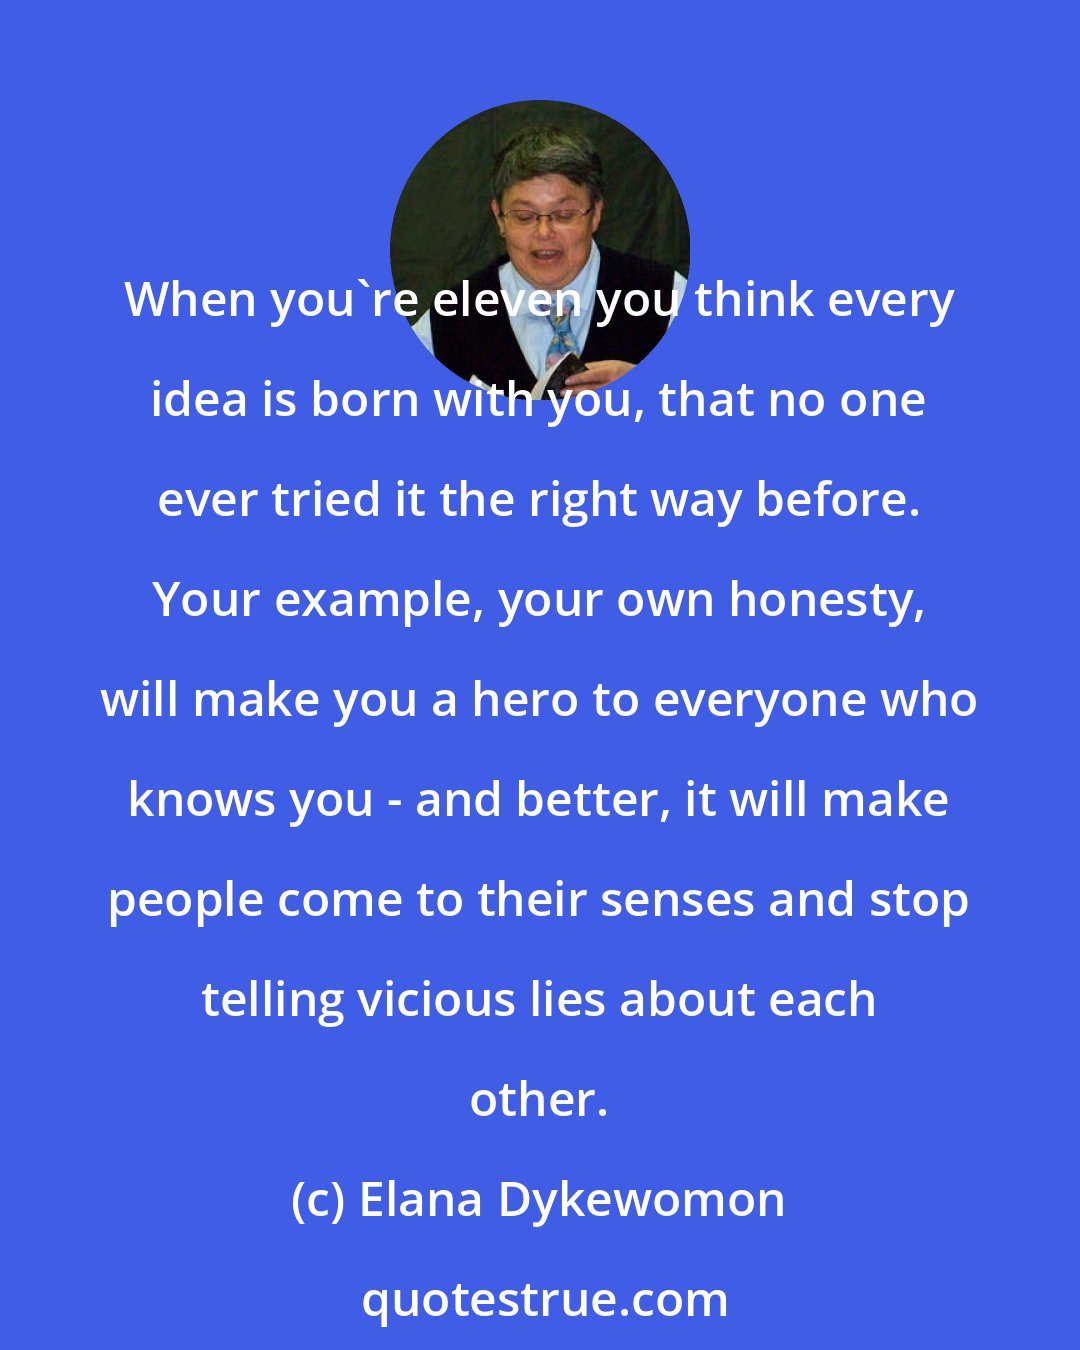 Elana Dykewomon: When you're eleven you think every idea is born with you, that no one ever tried it the right way before. Your example, your own honesty, will make you a hero to everyone who knows you - and better, it will make people come to their senses and stop telling vicious lies about each other.